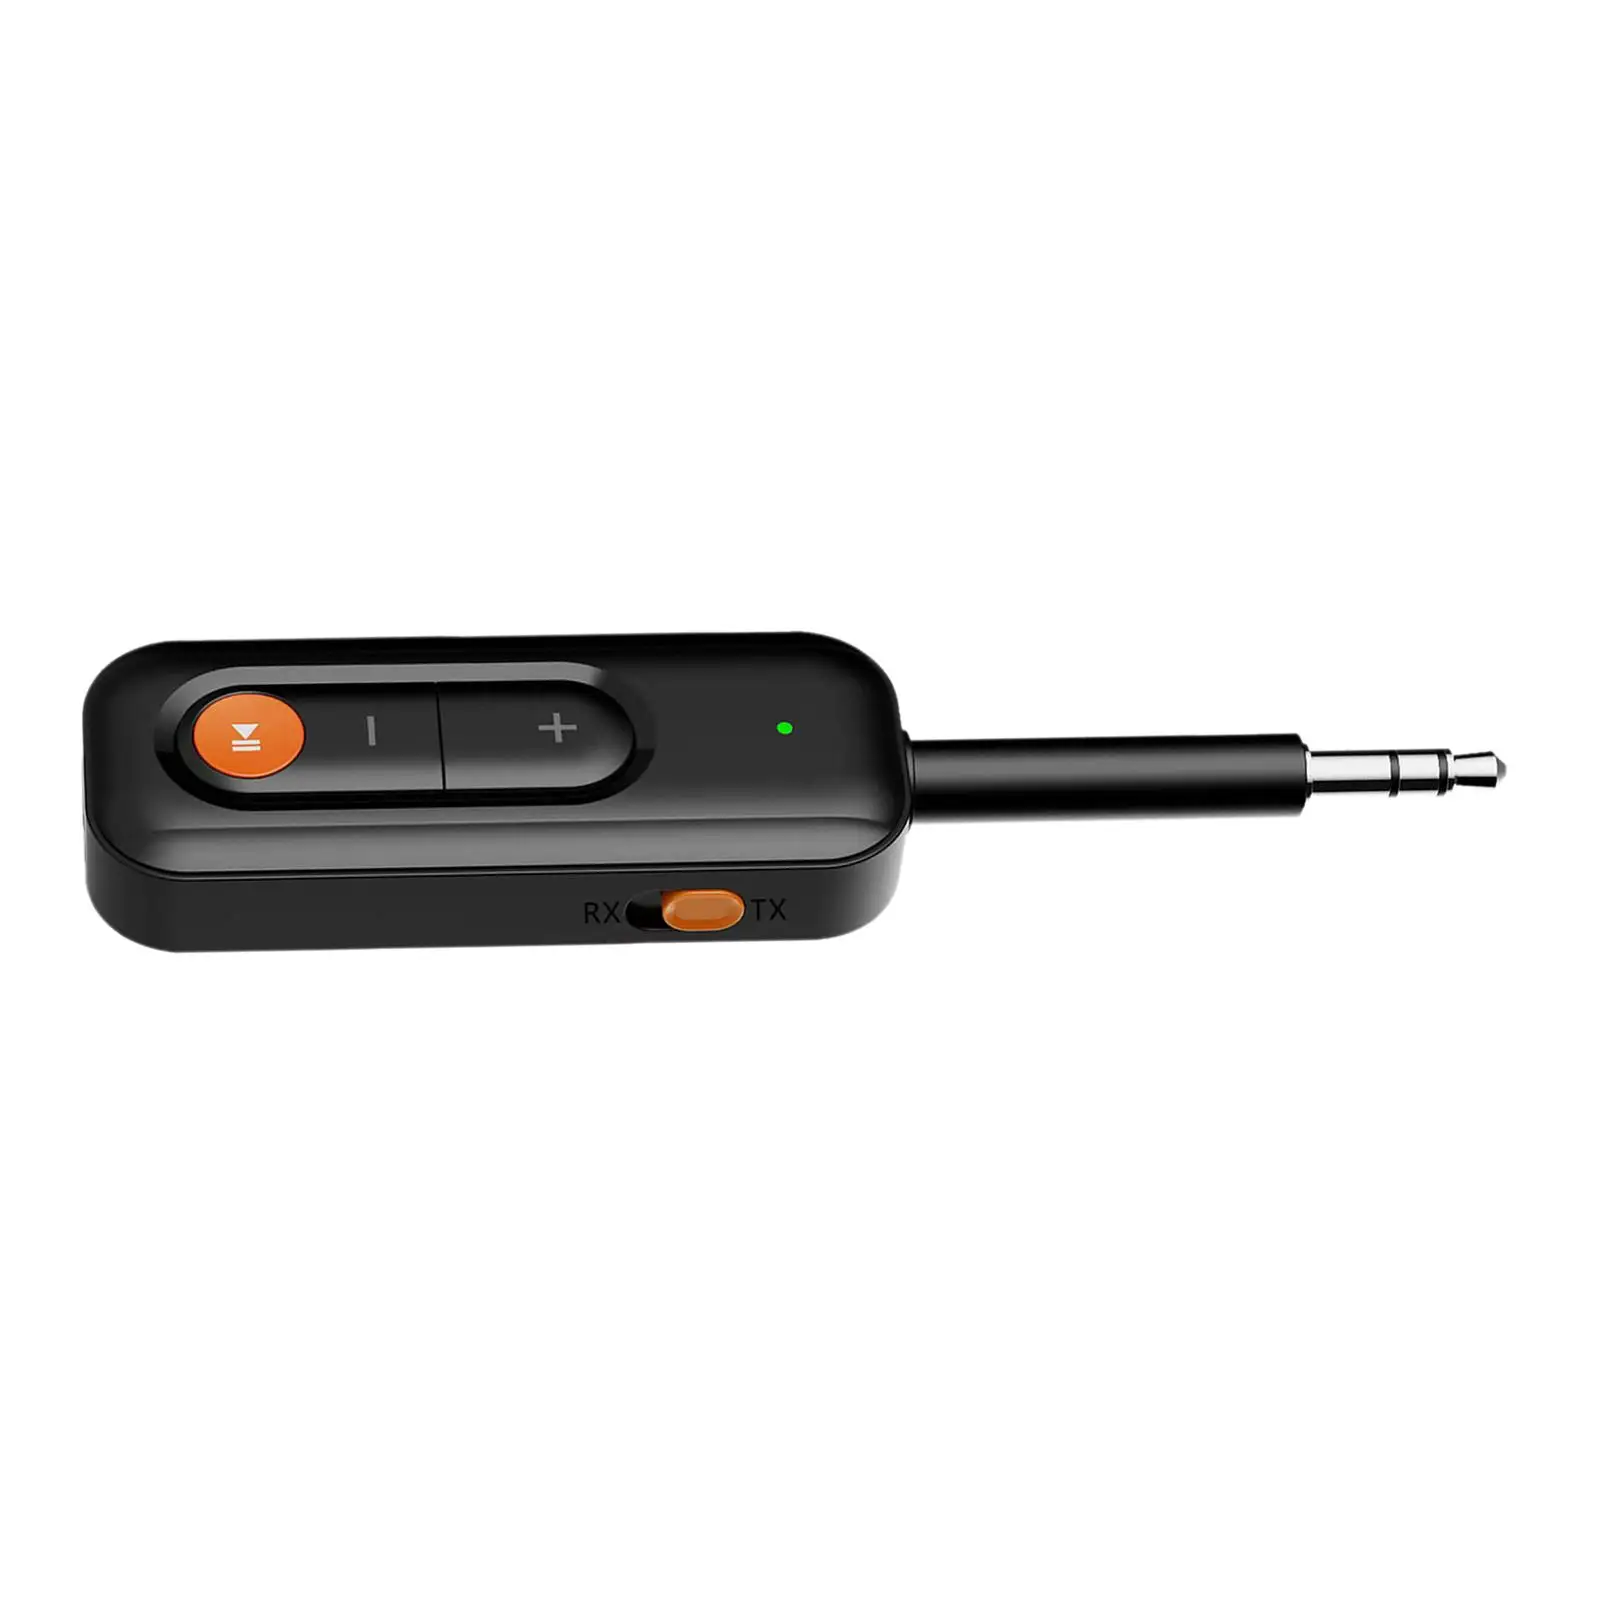 Audio Transmitter and Receiver Transceiver Lightweight 2 in 1 for Car Stereo